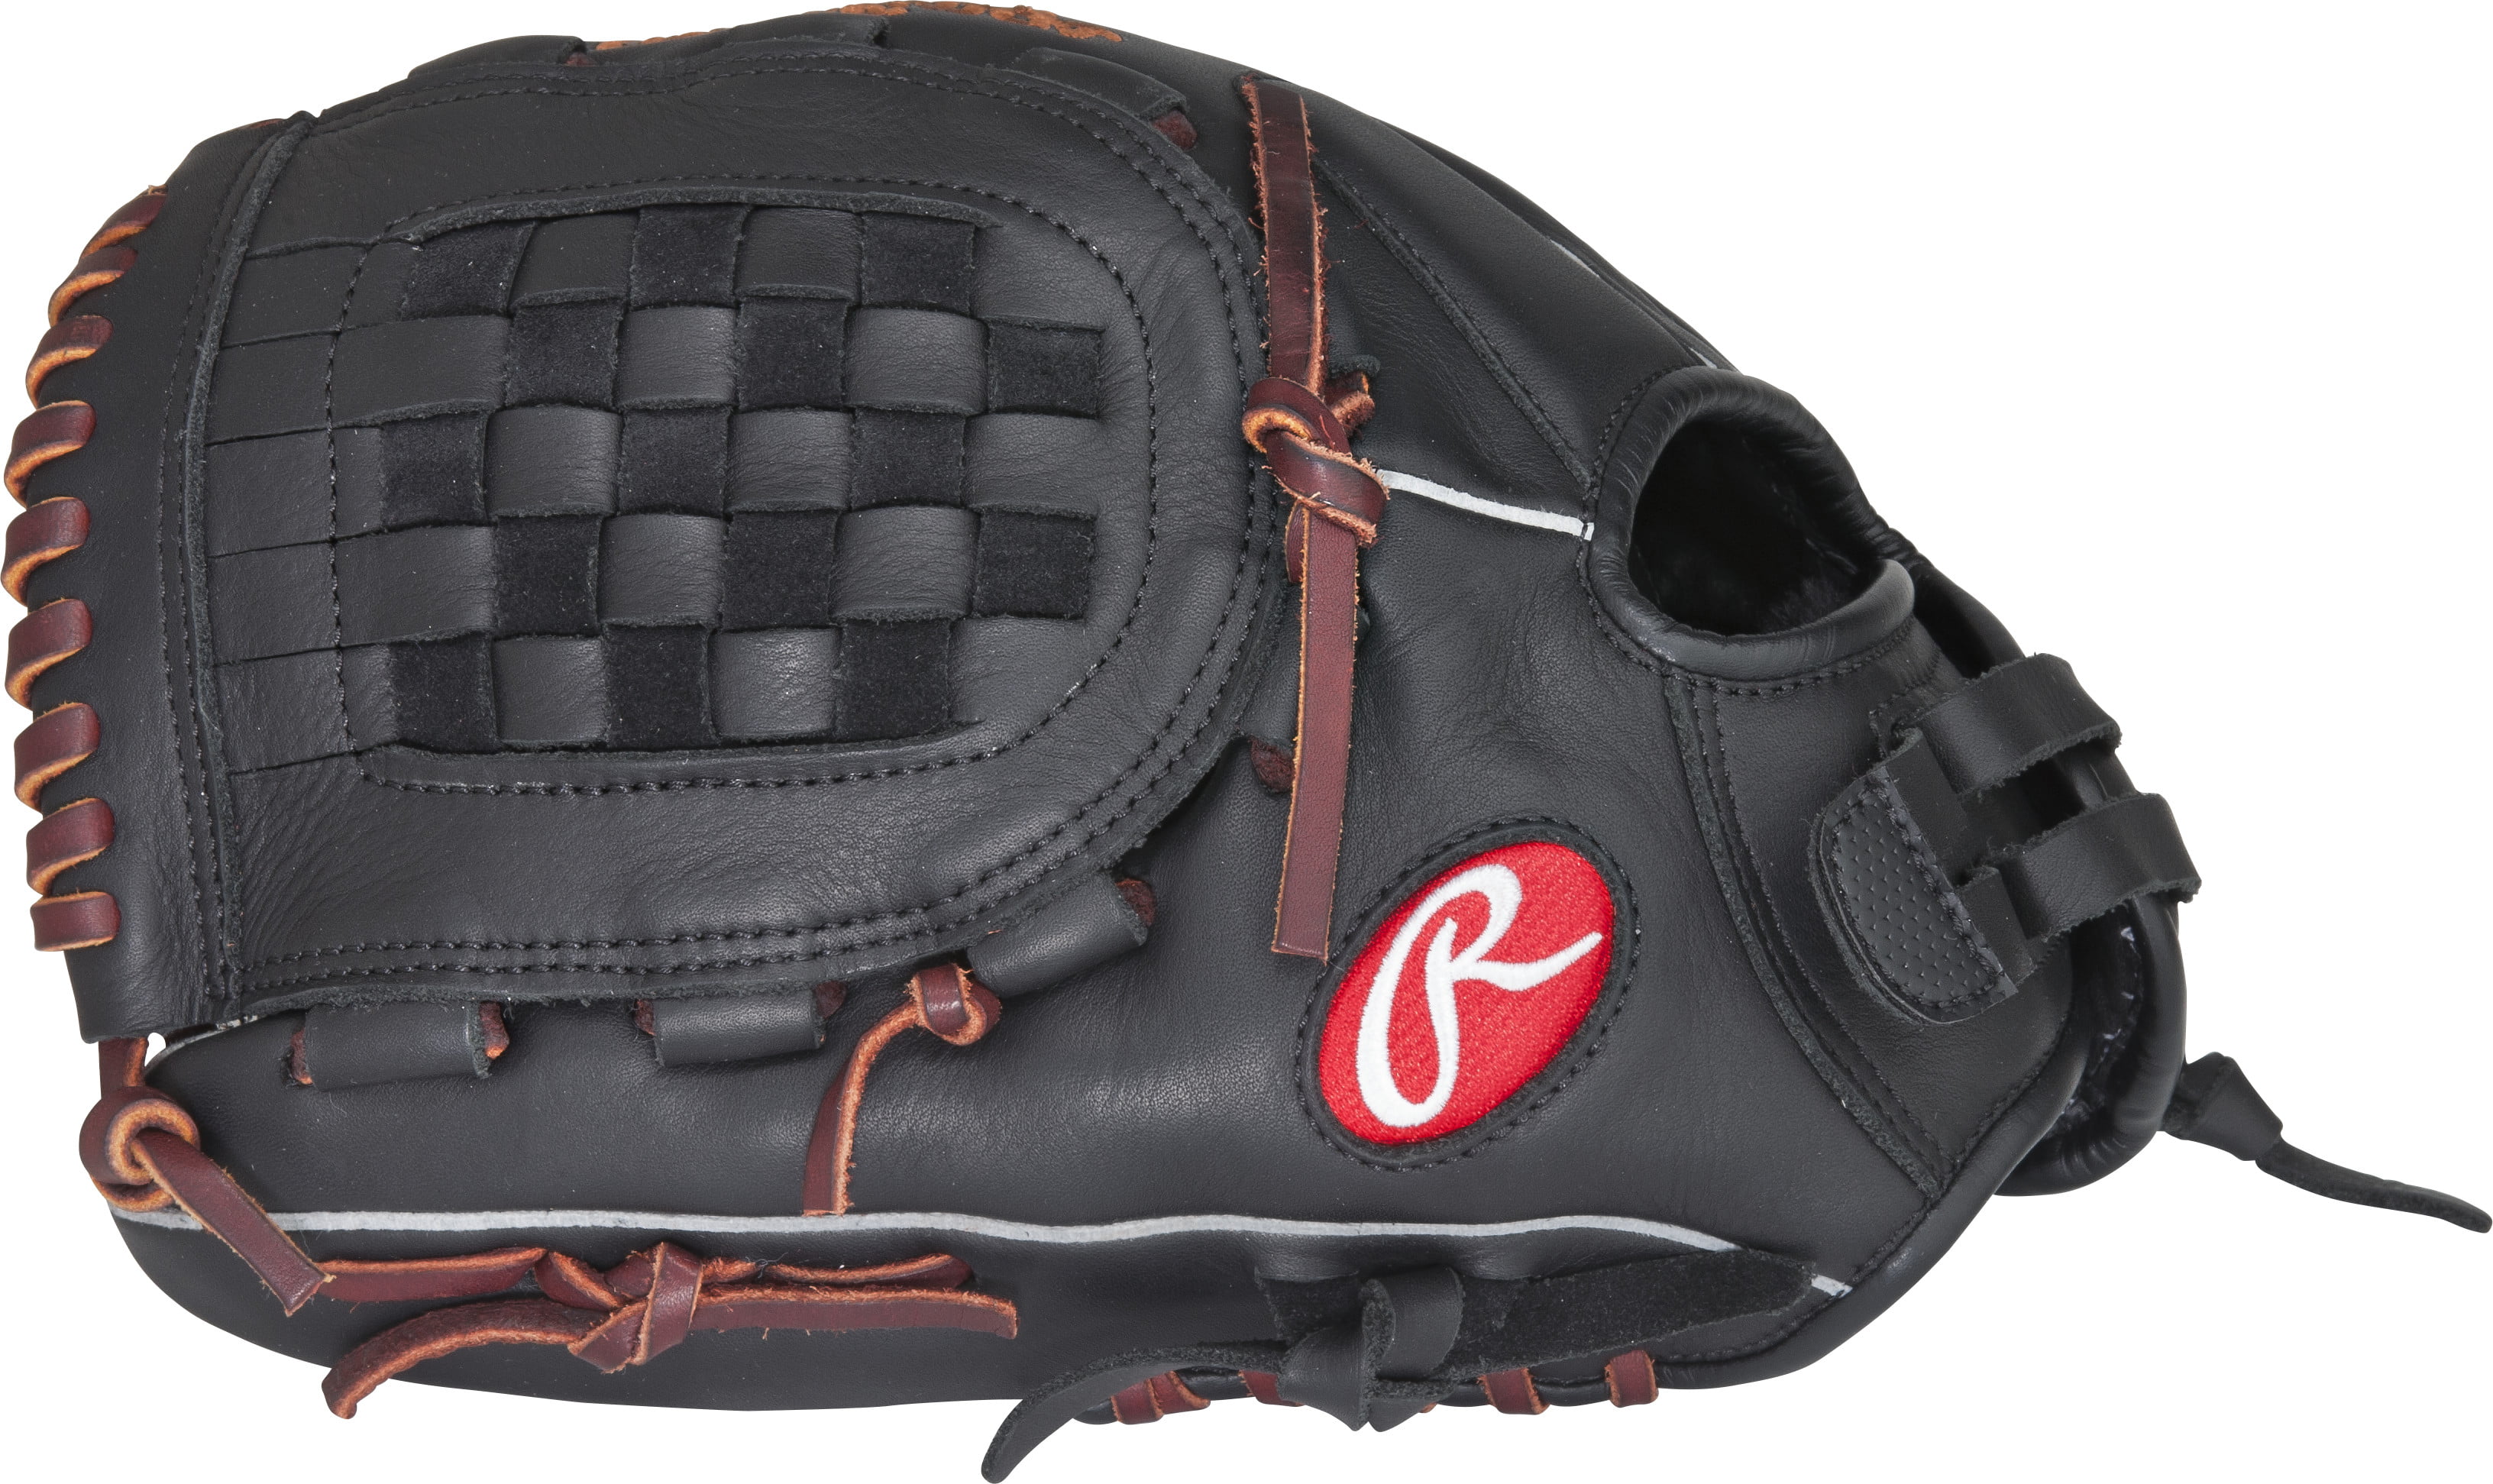 Rawlings Fastpitch Series FP120 Ball Glove for sale online 